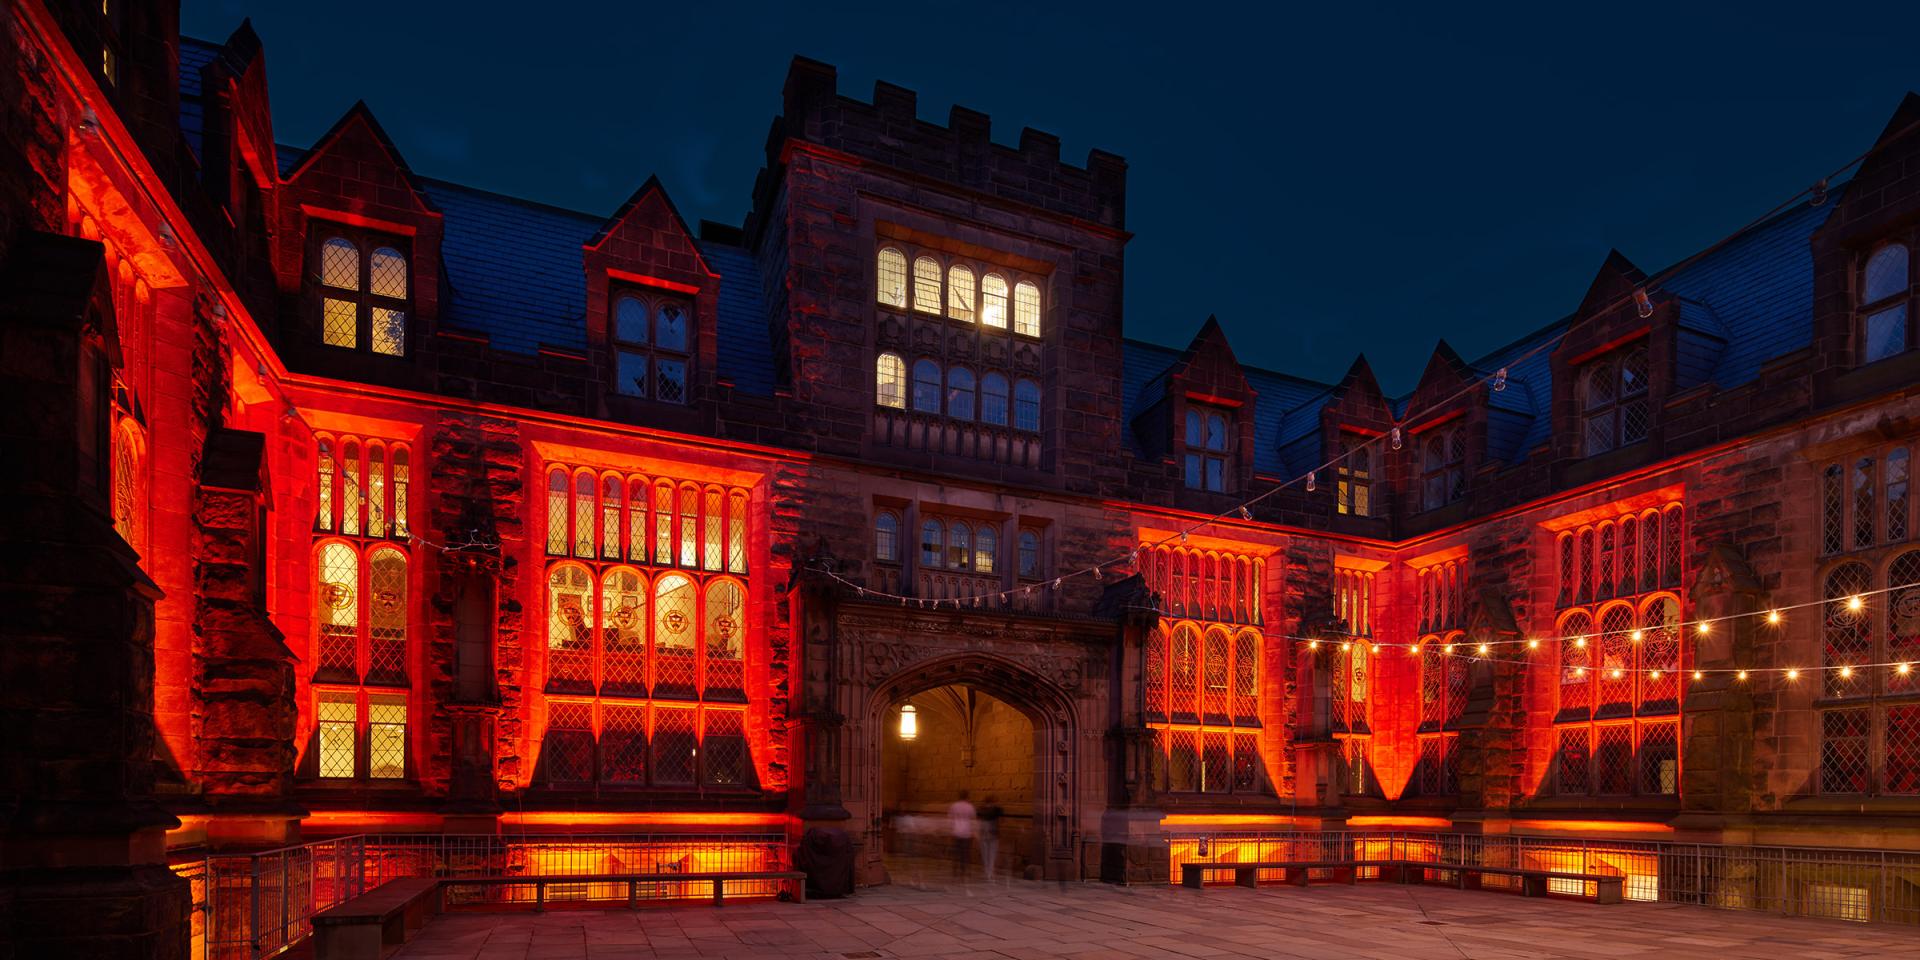 East Pyne Hall, at night, bathed in orange lights